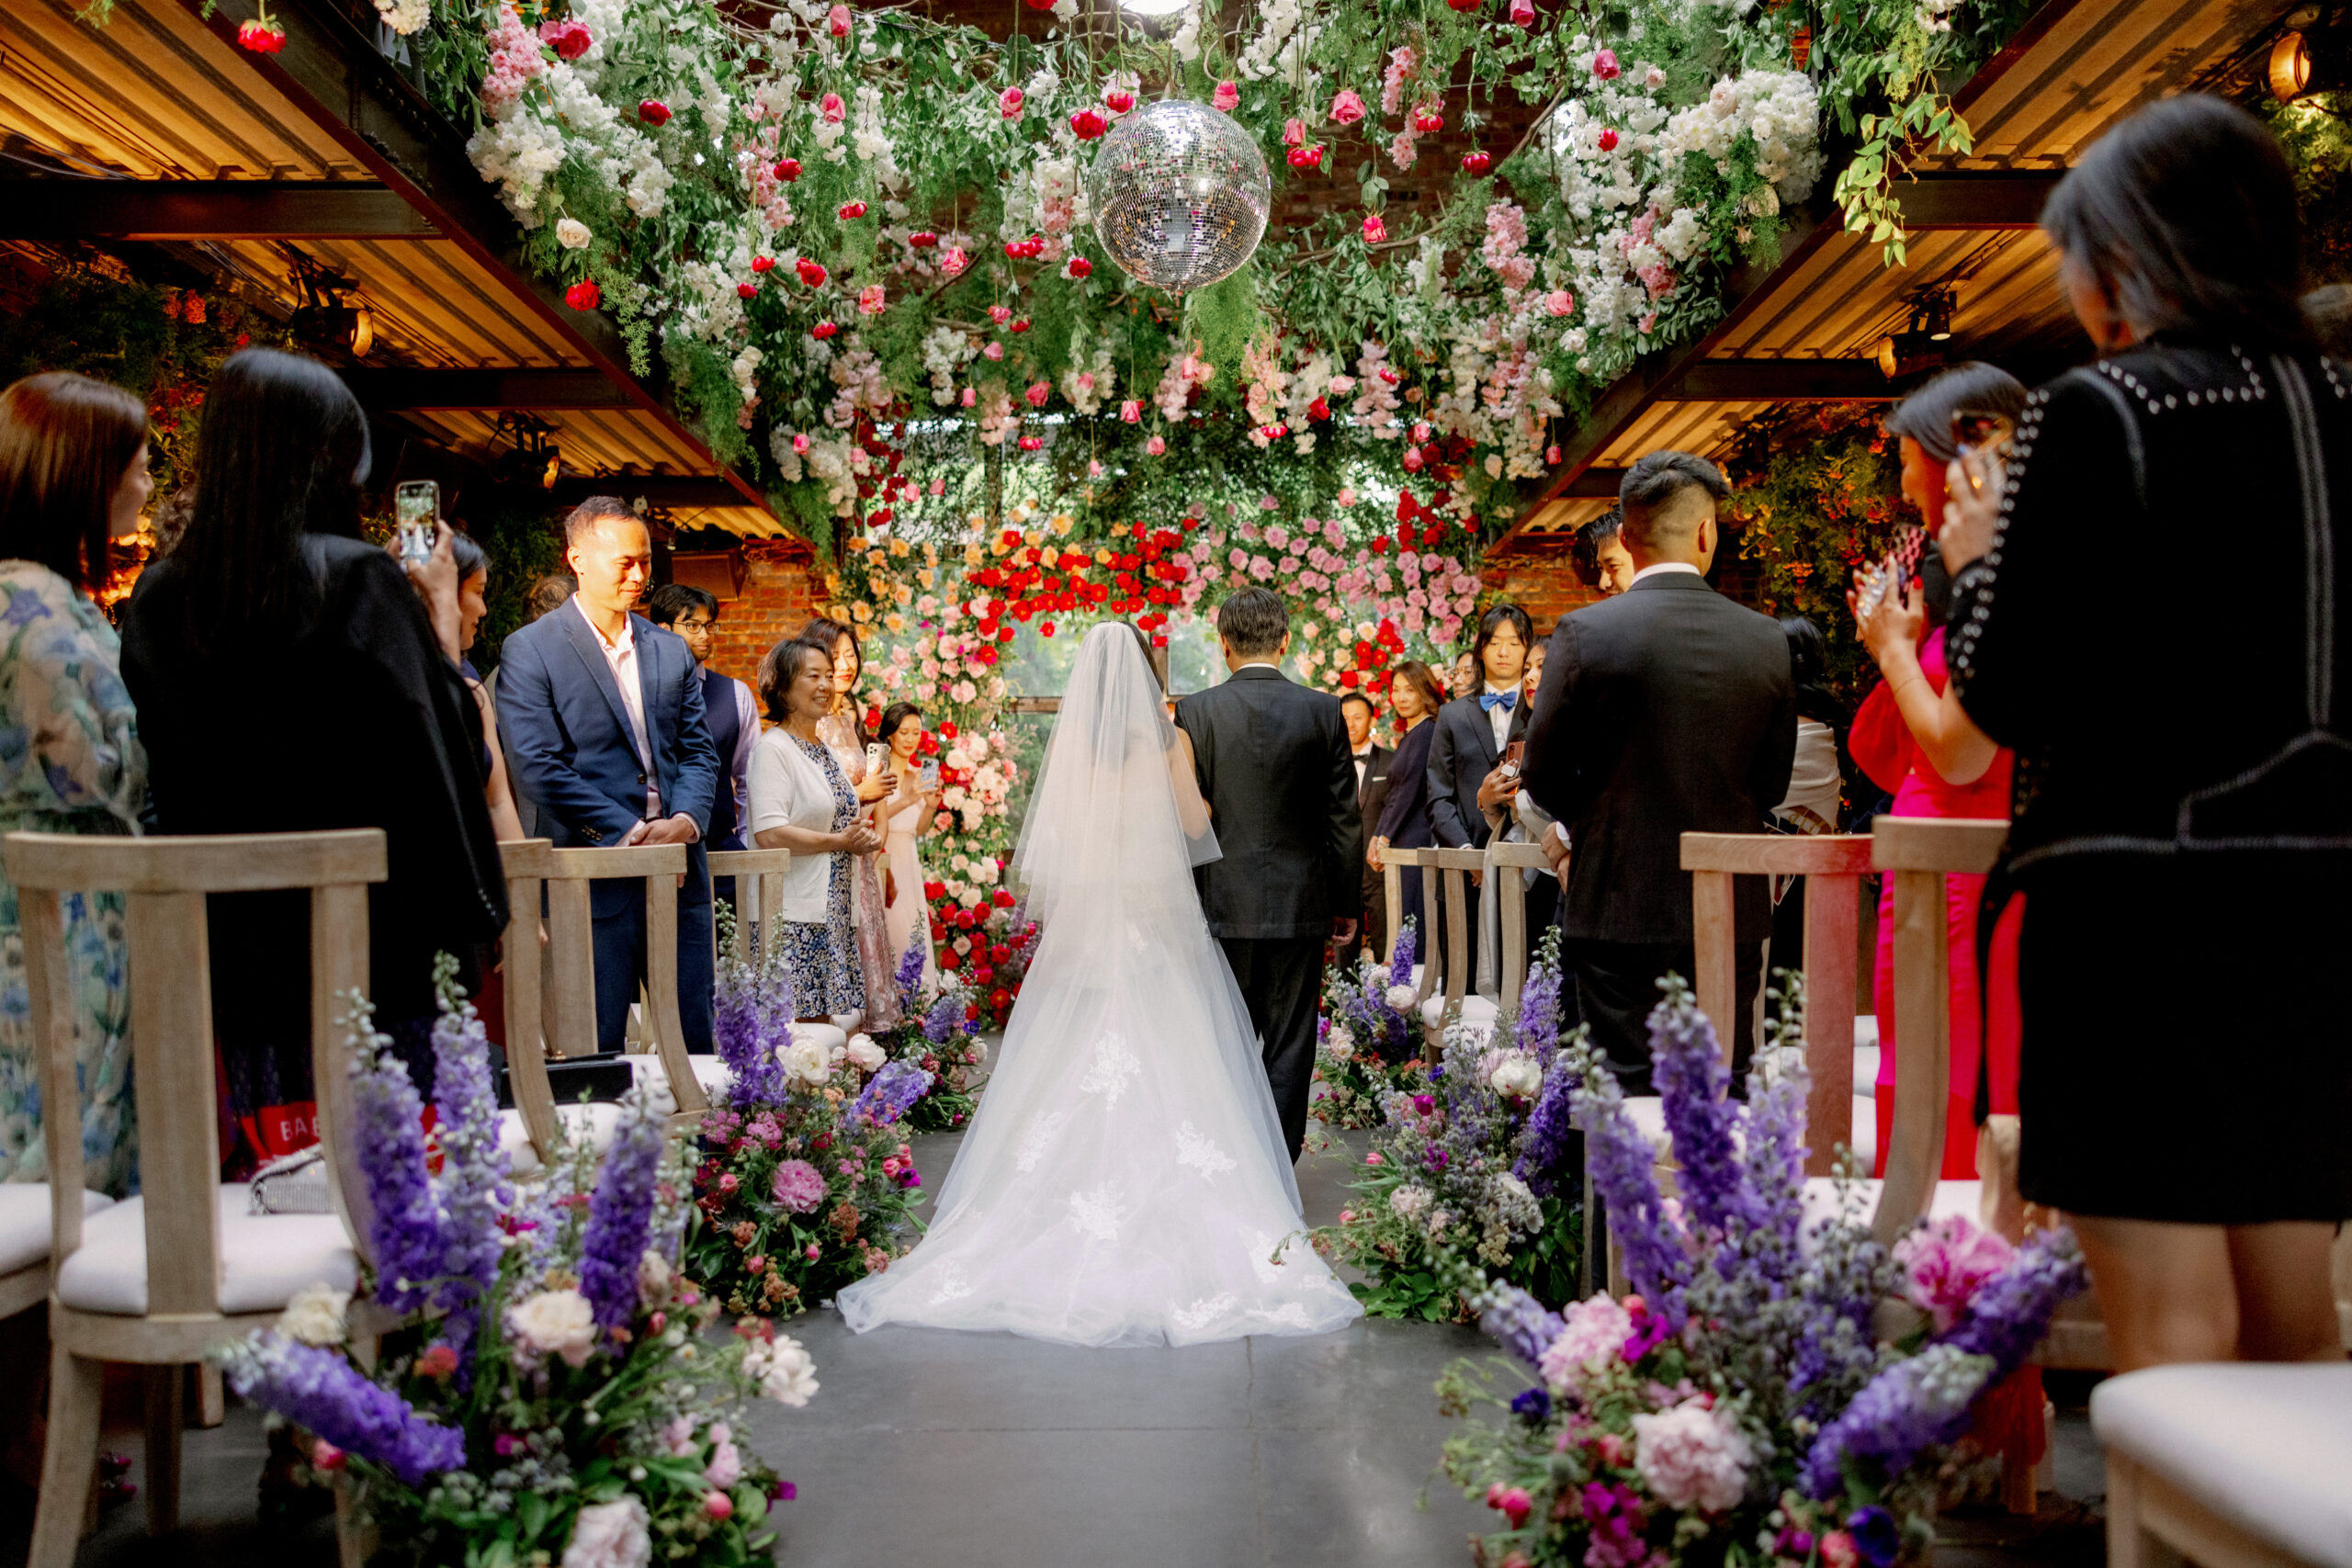 Beautiful wedding ceremony with lots of flowers at The Foundry. High-quality wedding photography image by Jenny Fu Studio